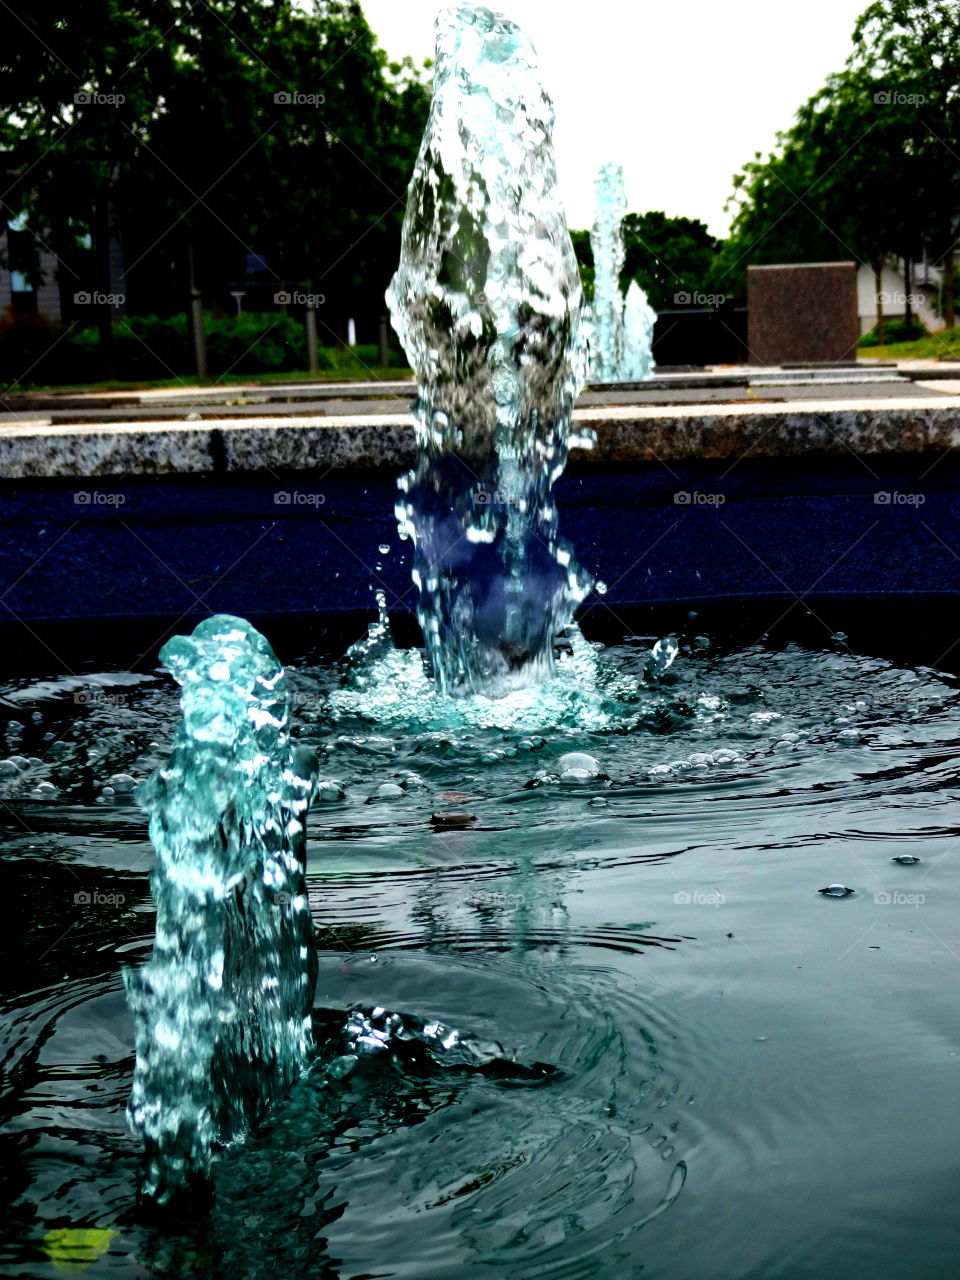 fountain. Fountains in the Jubille Campus, University of Nottingham in UK